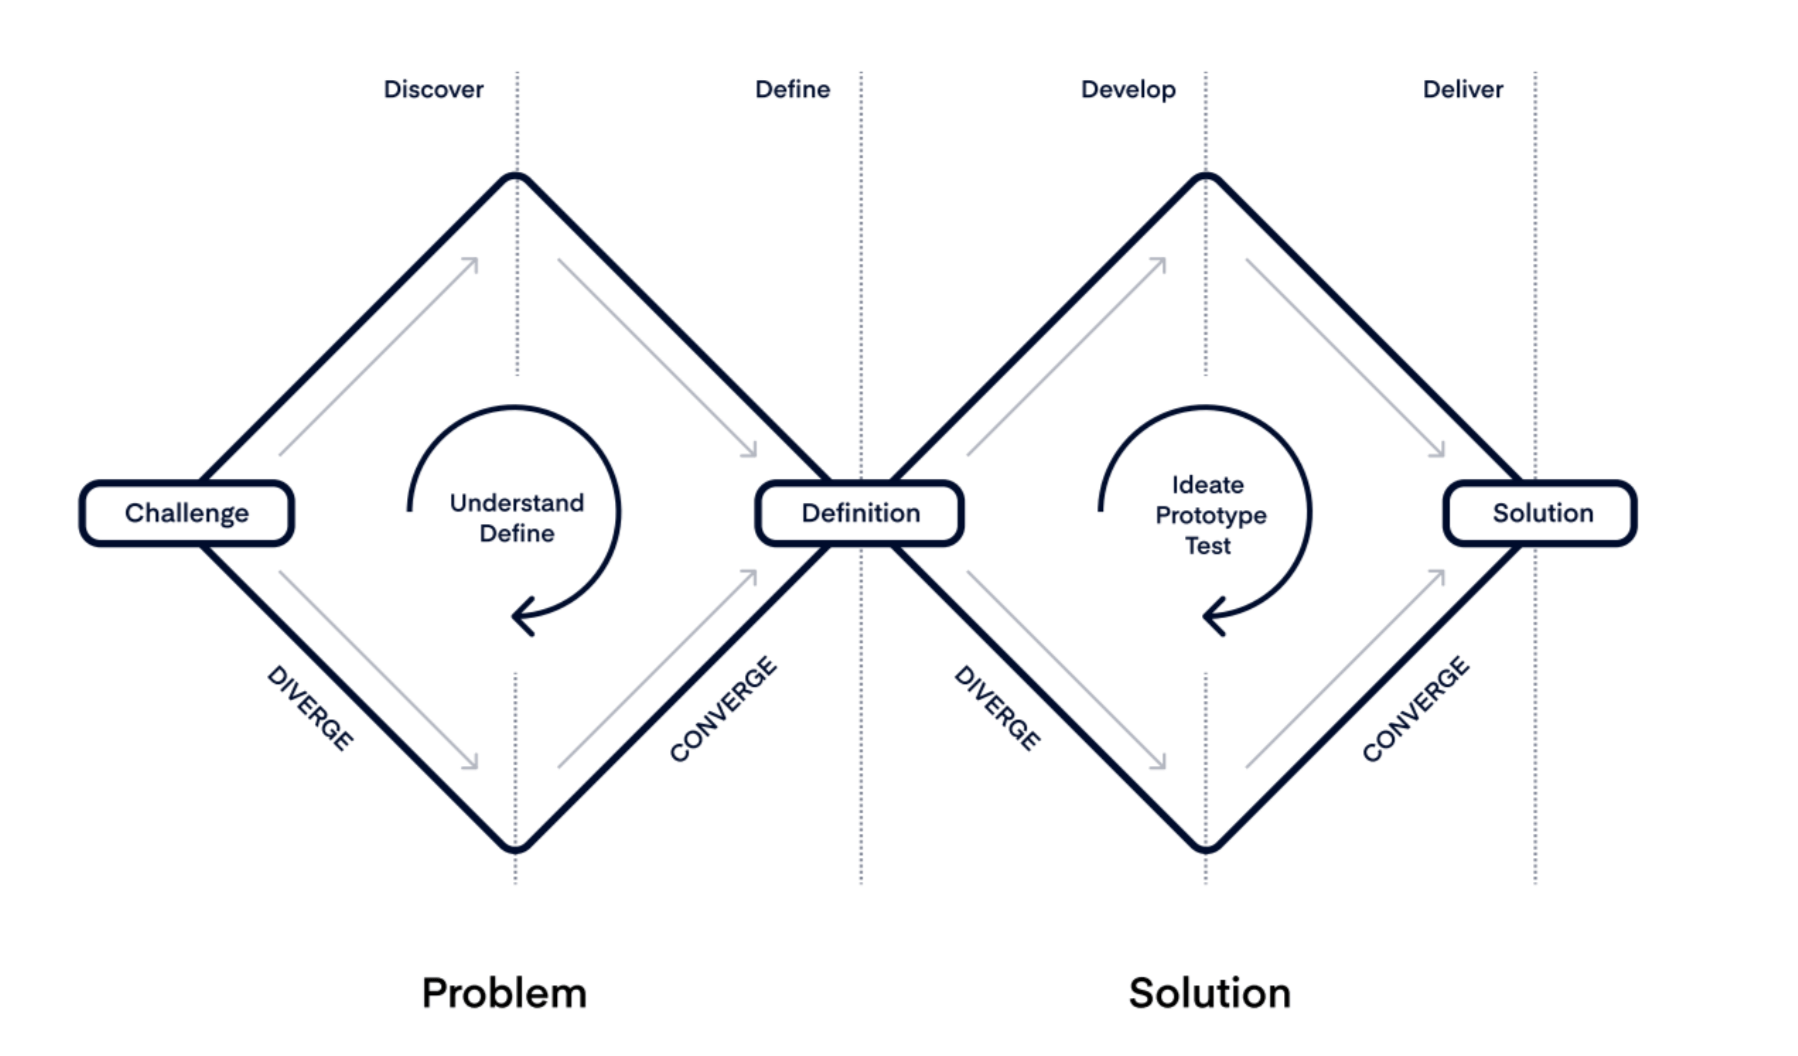 A step-by-step guide for conducting better product discovery